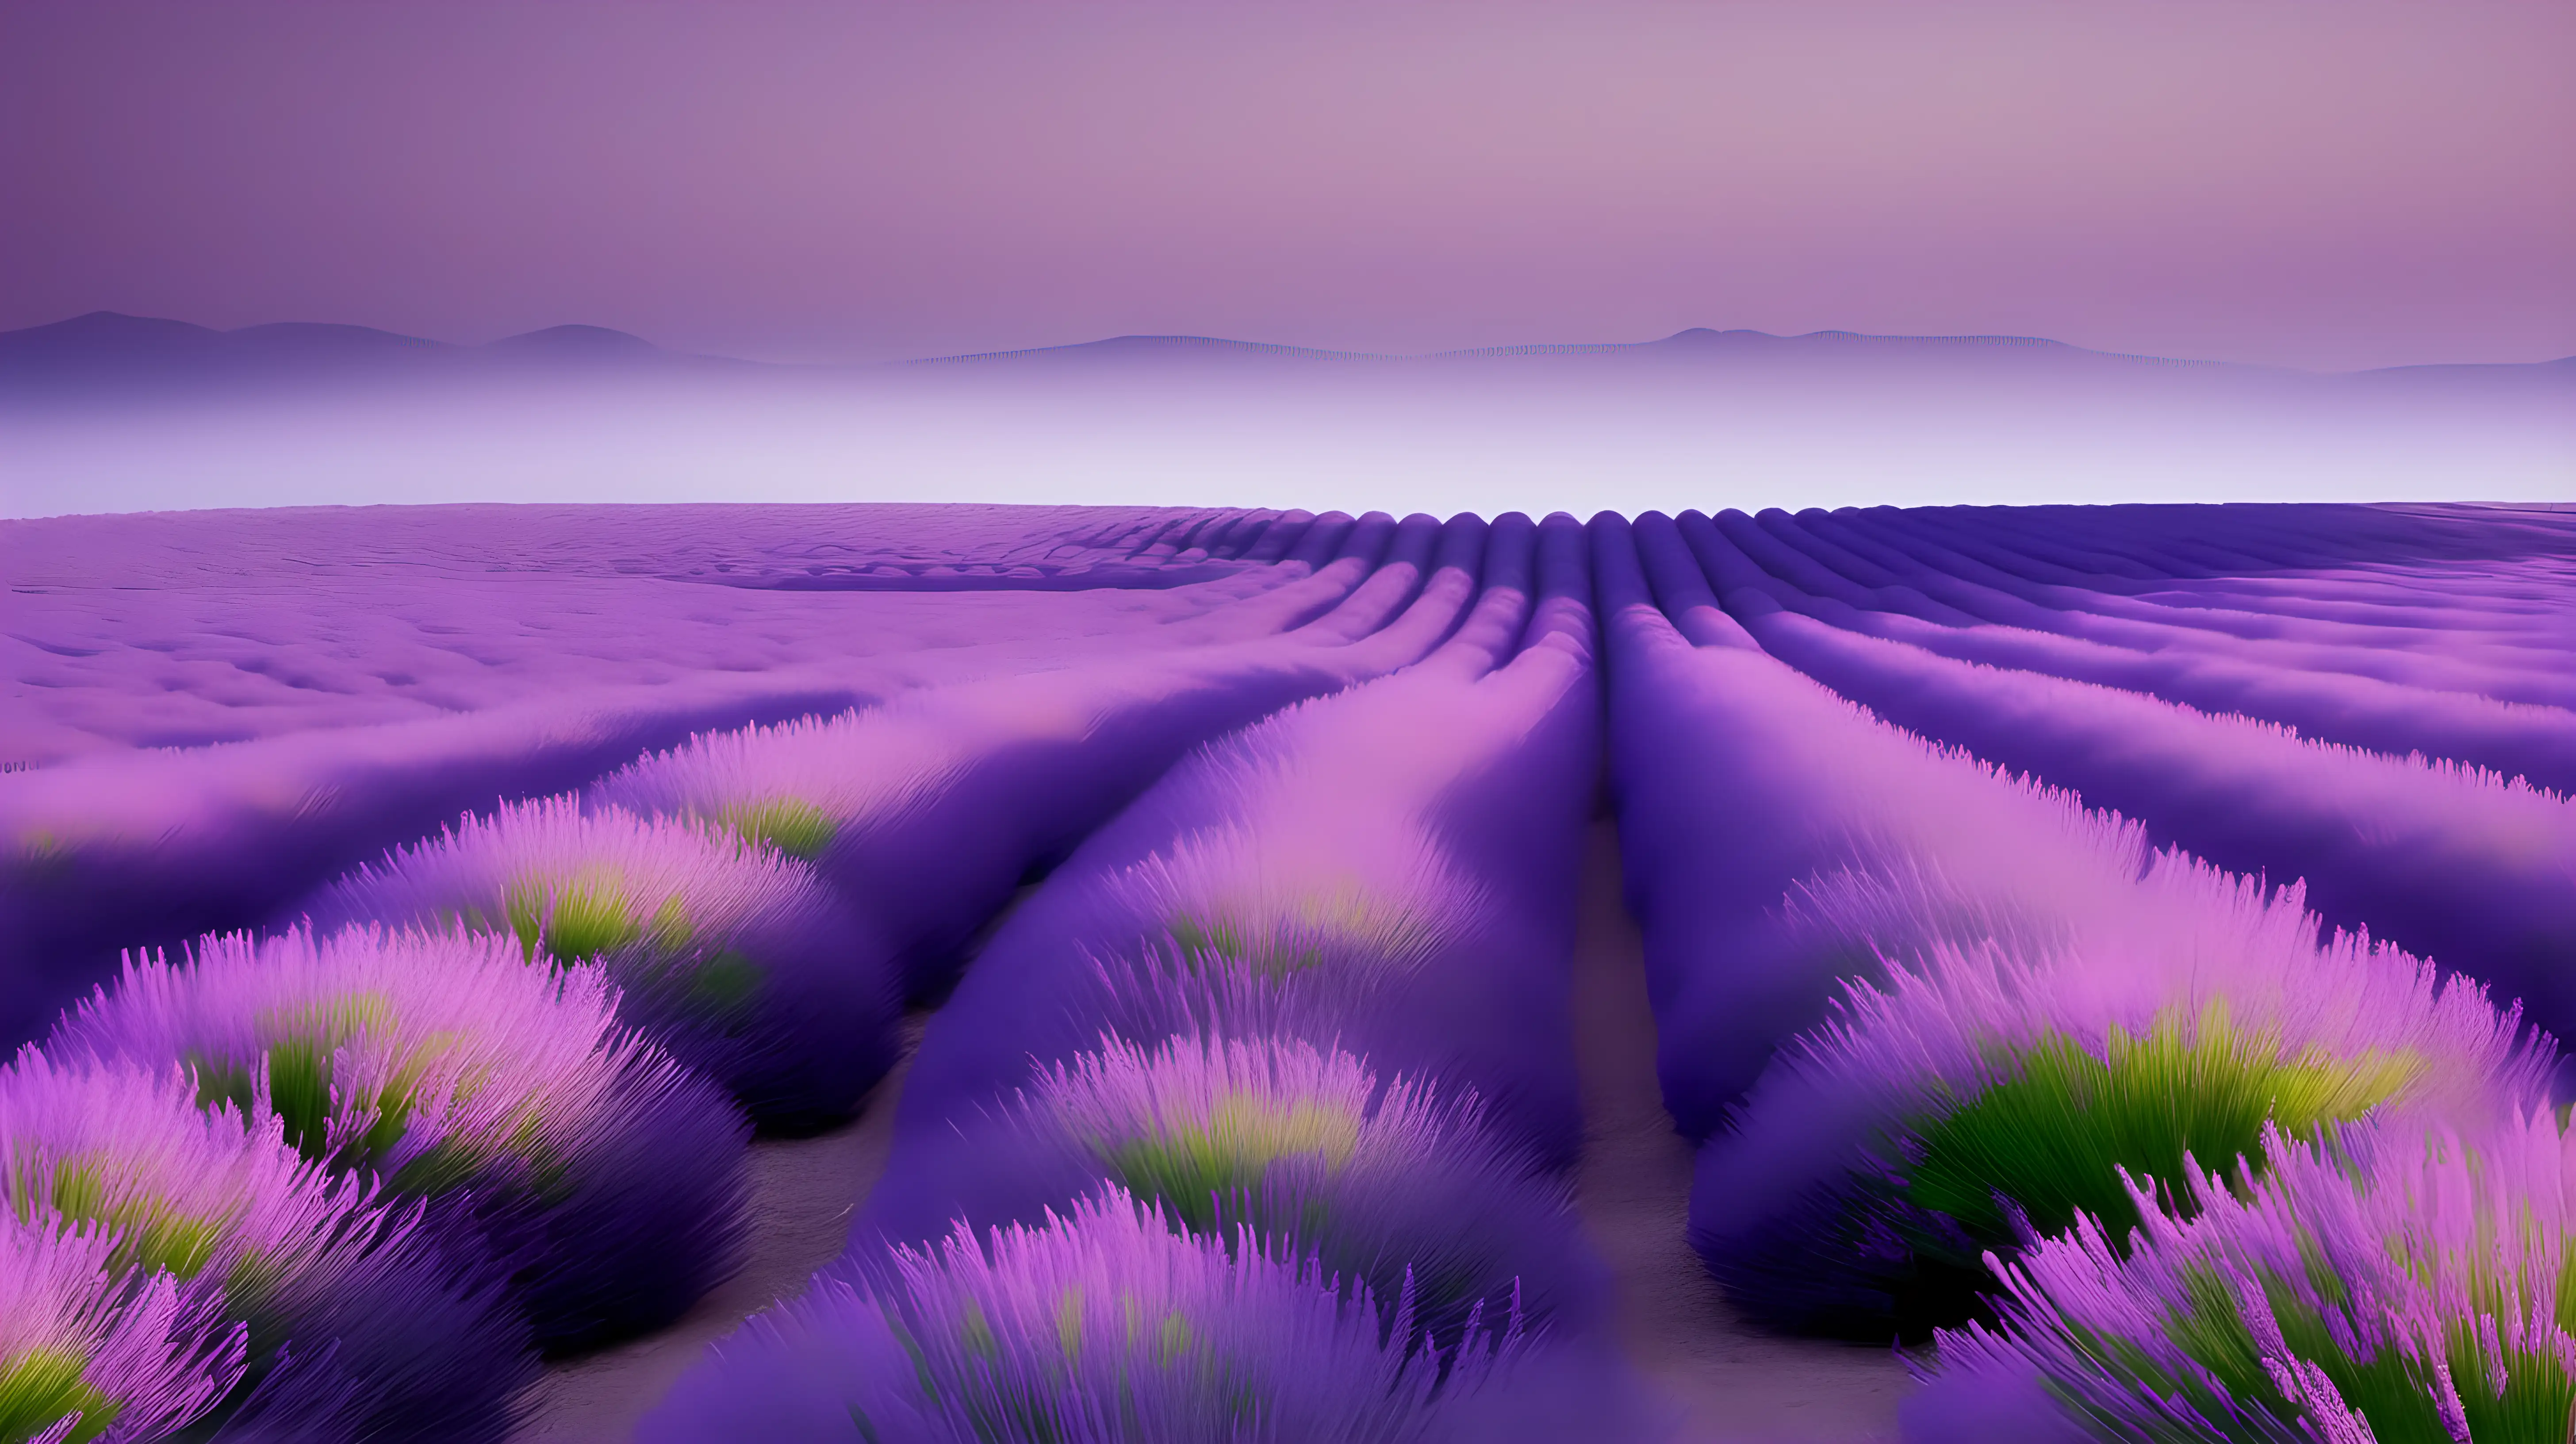 Tranquil lavender with wisps of delicate mauve.